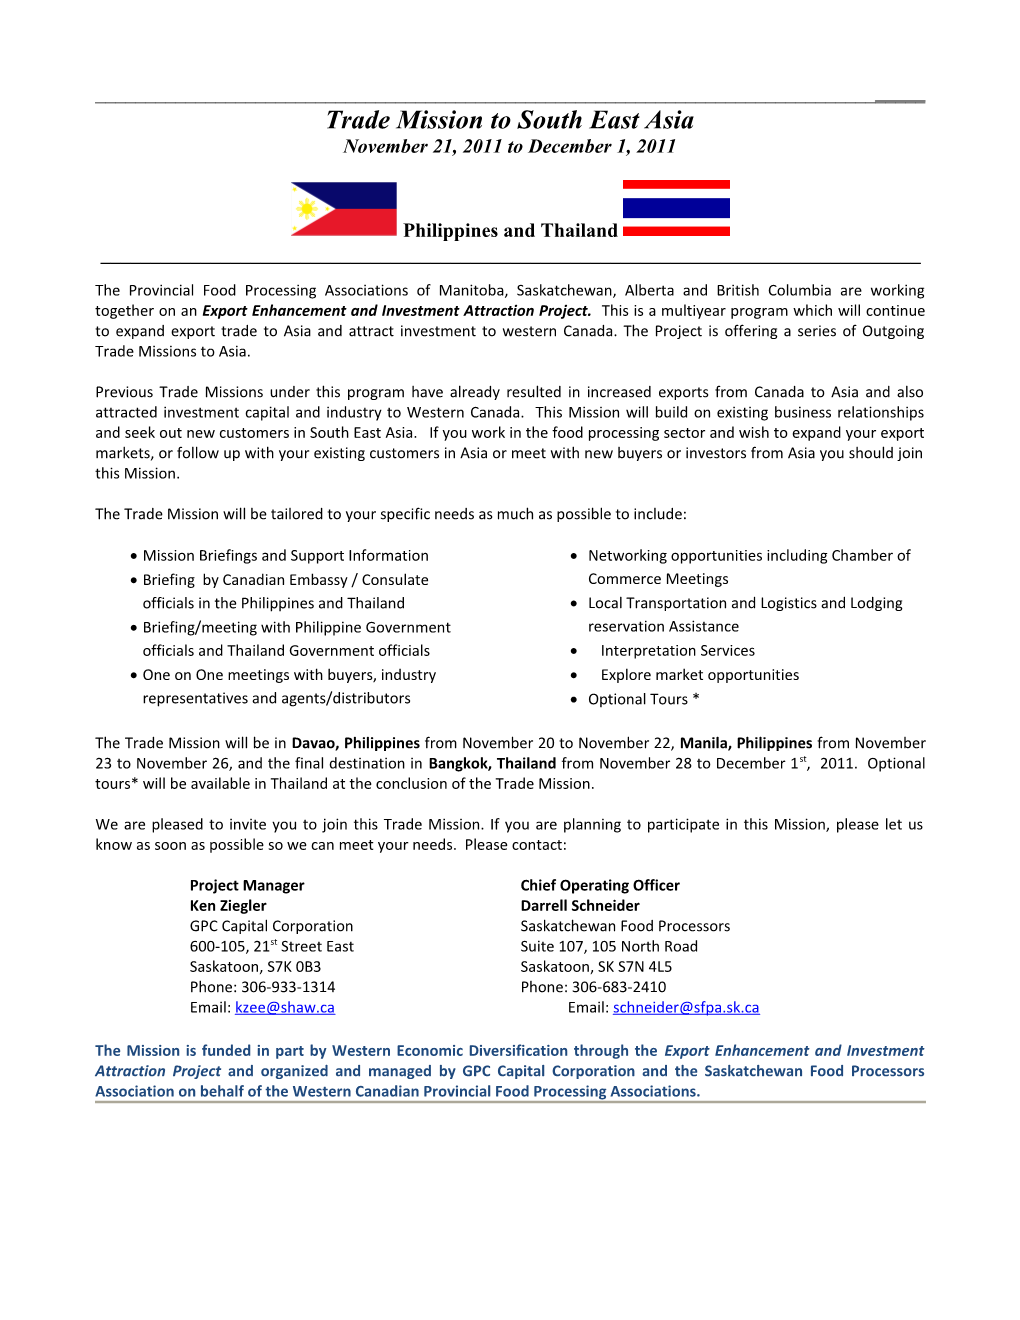 Trade Mission # 3 - to Philippines and Thailand (S0338423)